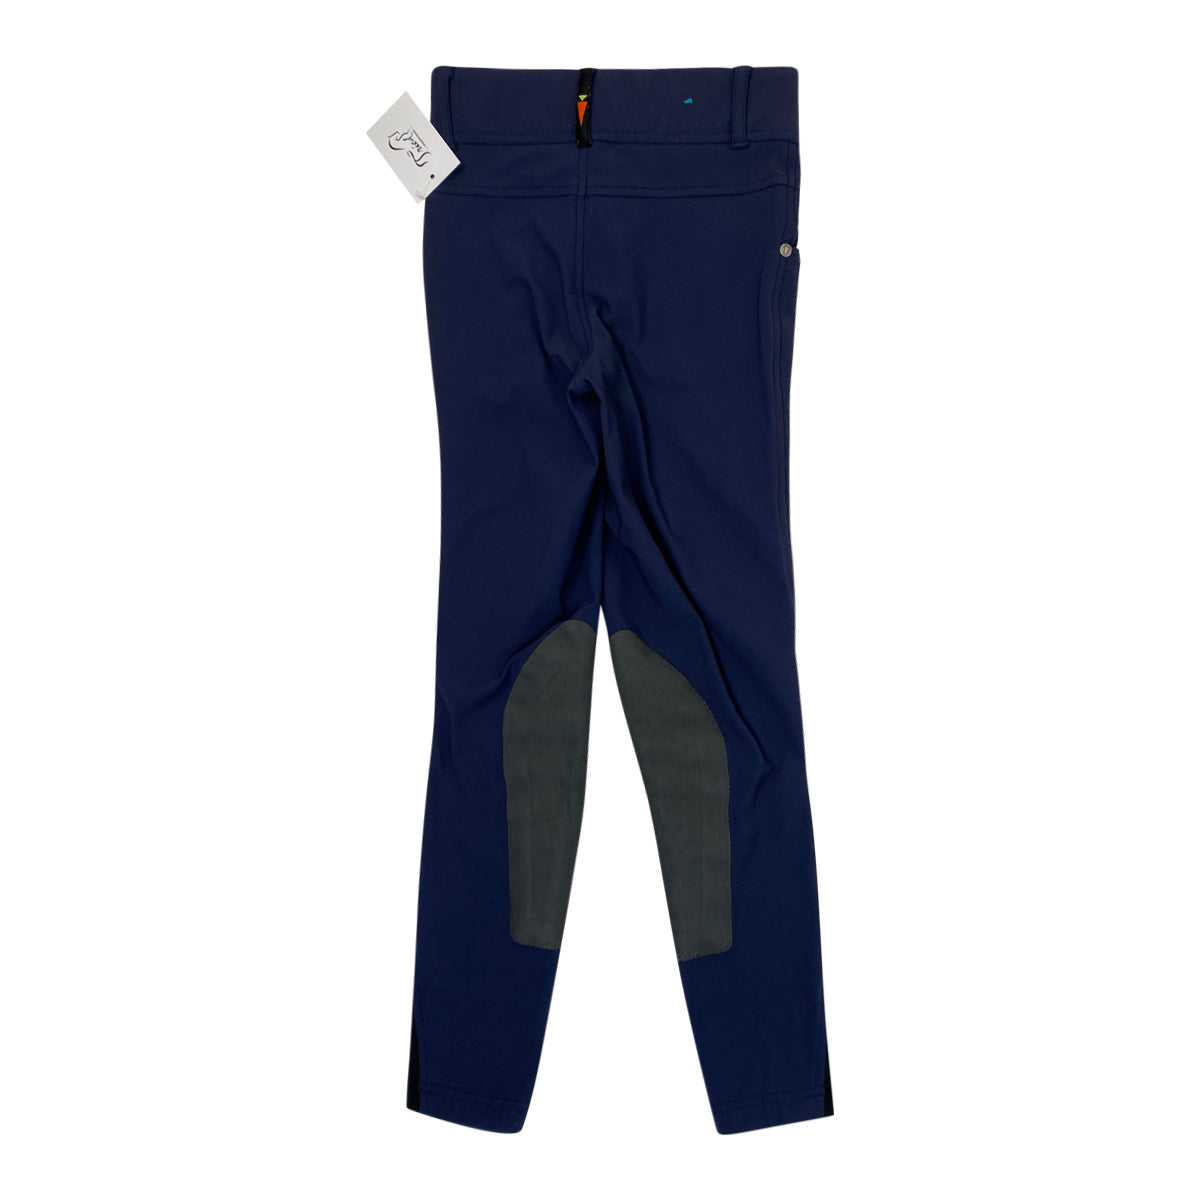 Kerrits 'Crossover II' Knee Patch Breeches in Navy